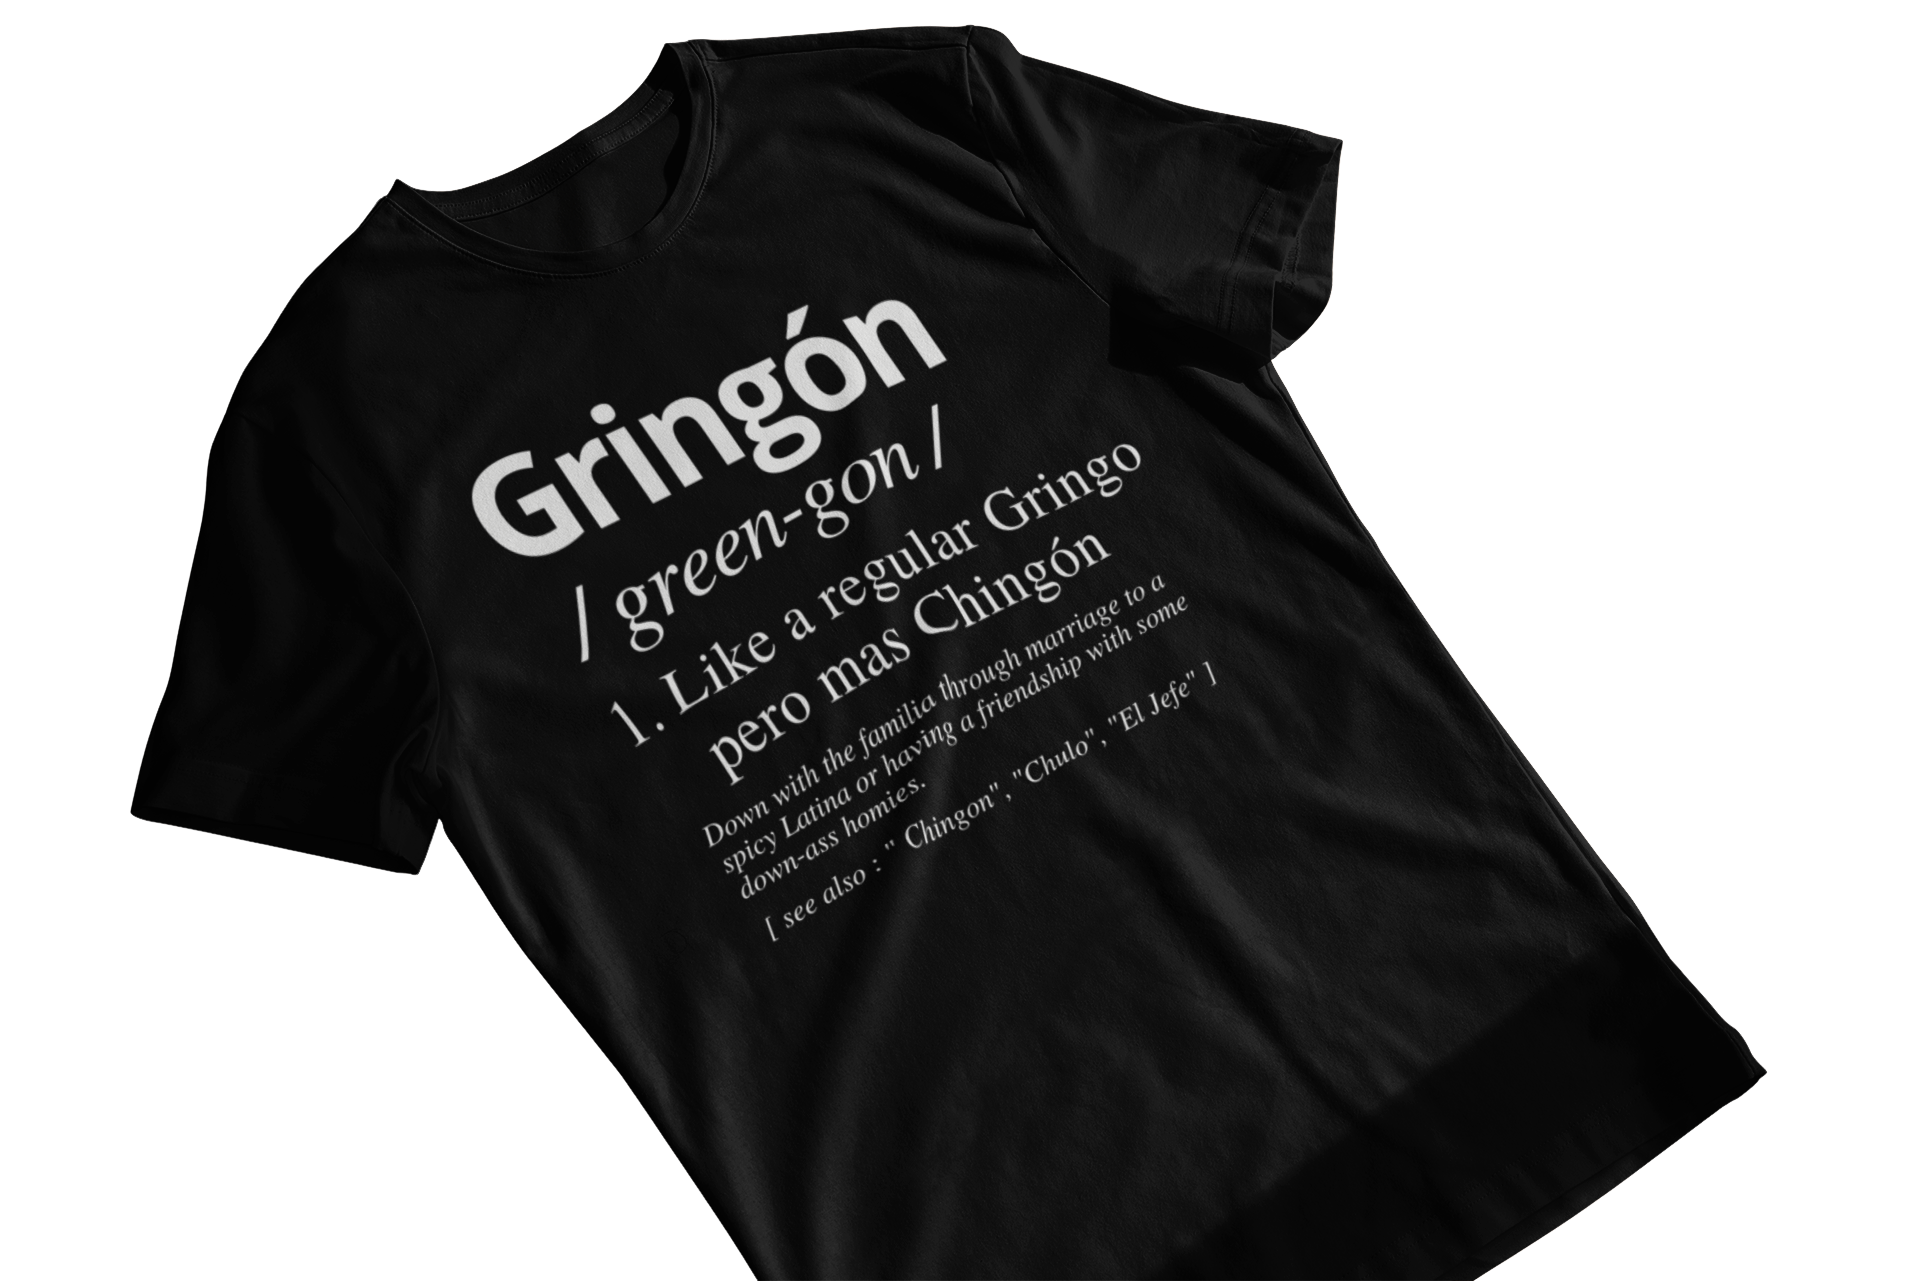 Men's t-shirt with a humorous twist on the word 'Gringon' and its definition